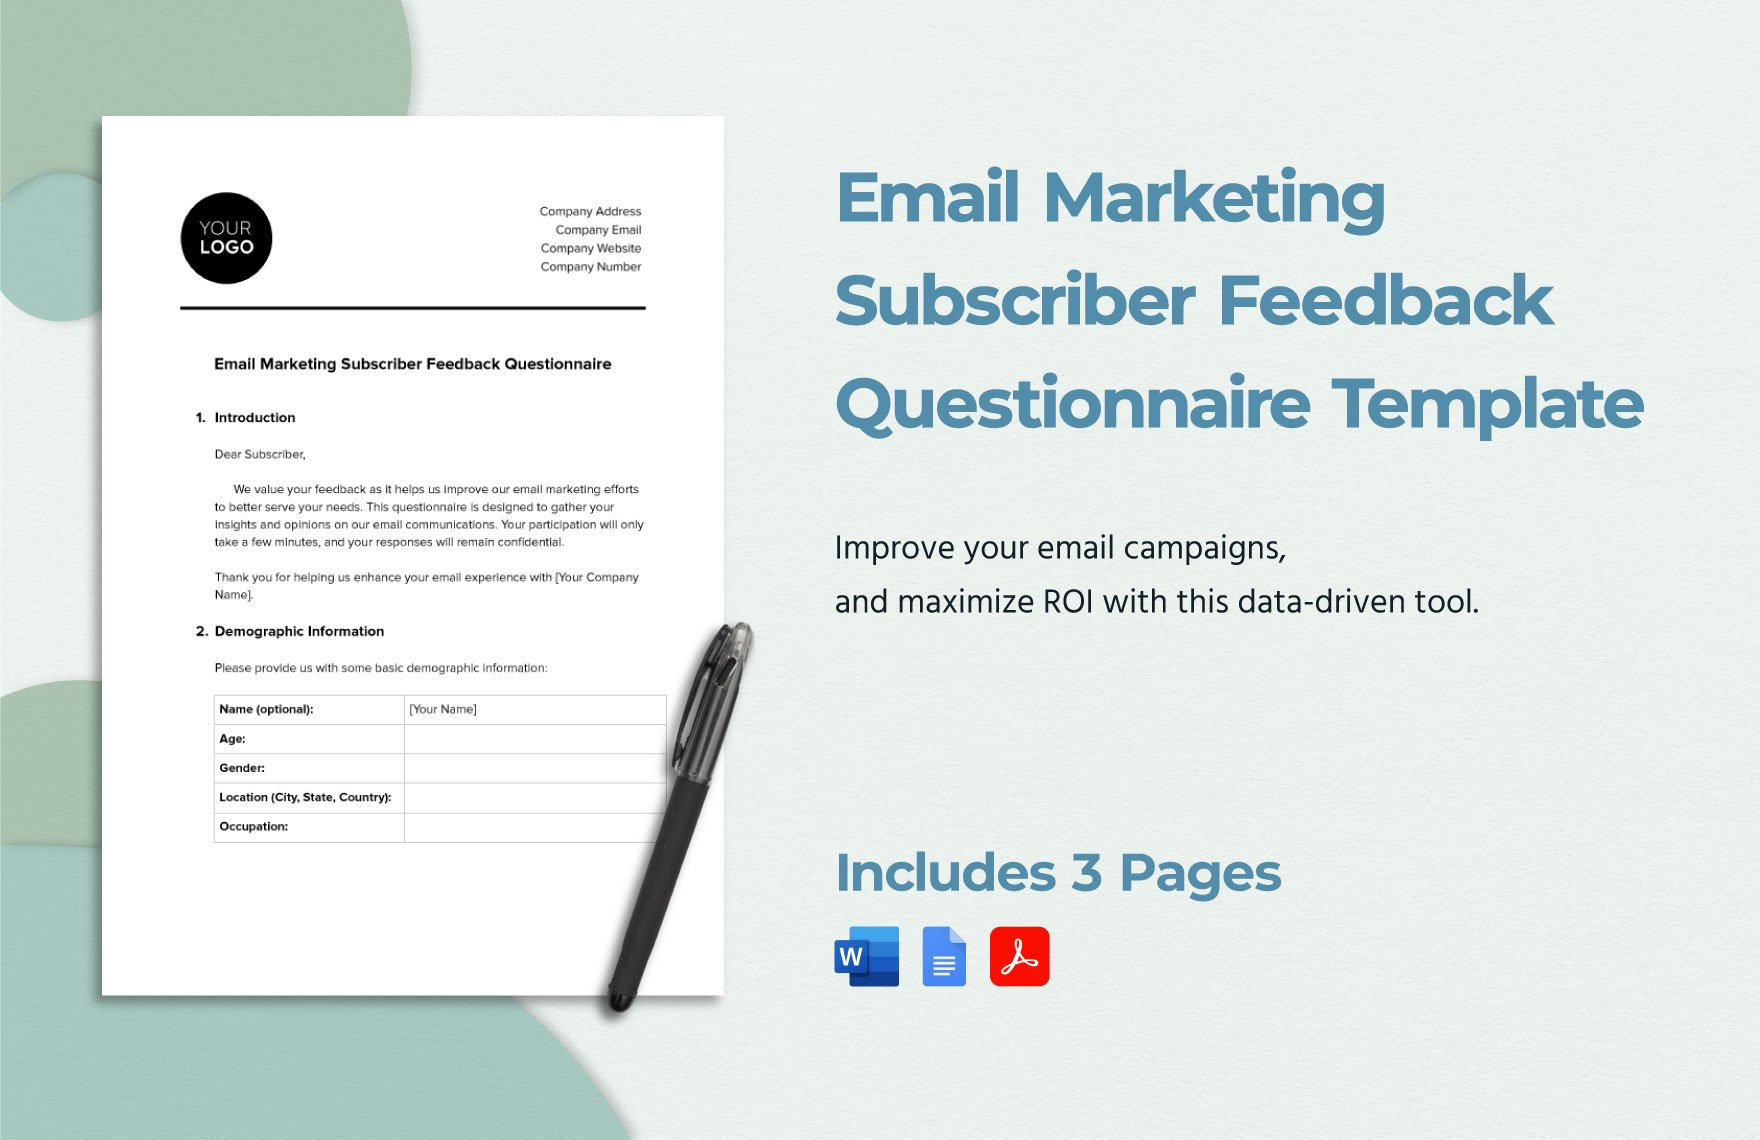 Email Marketing Subscriber Feedback Questionnaire Template in Google Docs